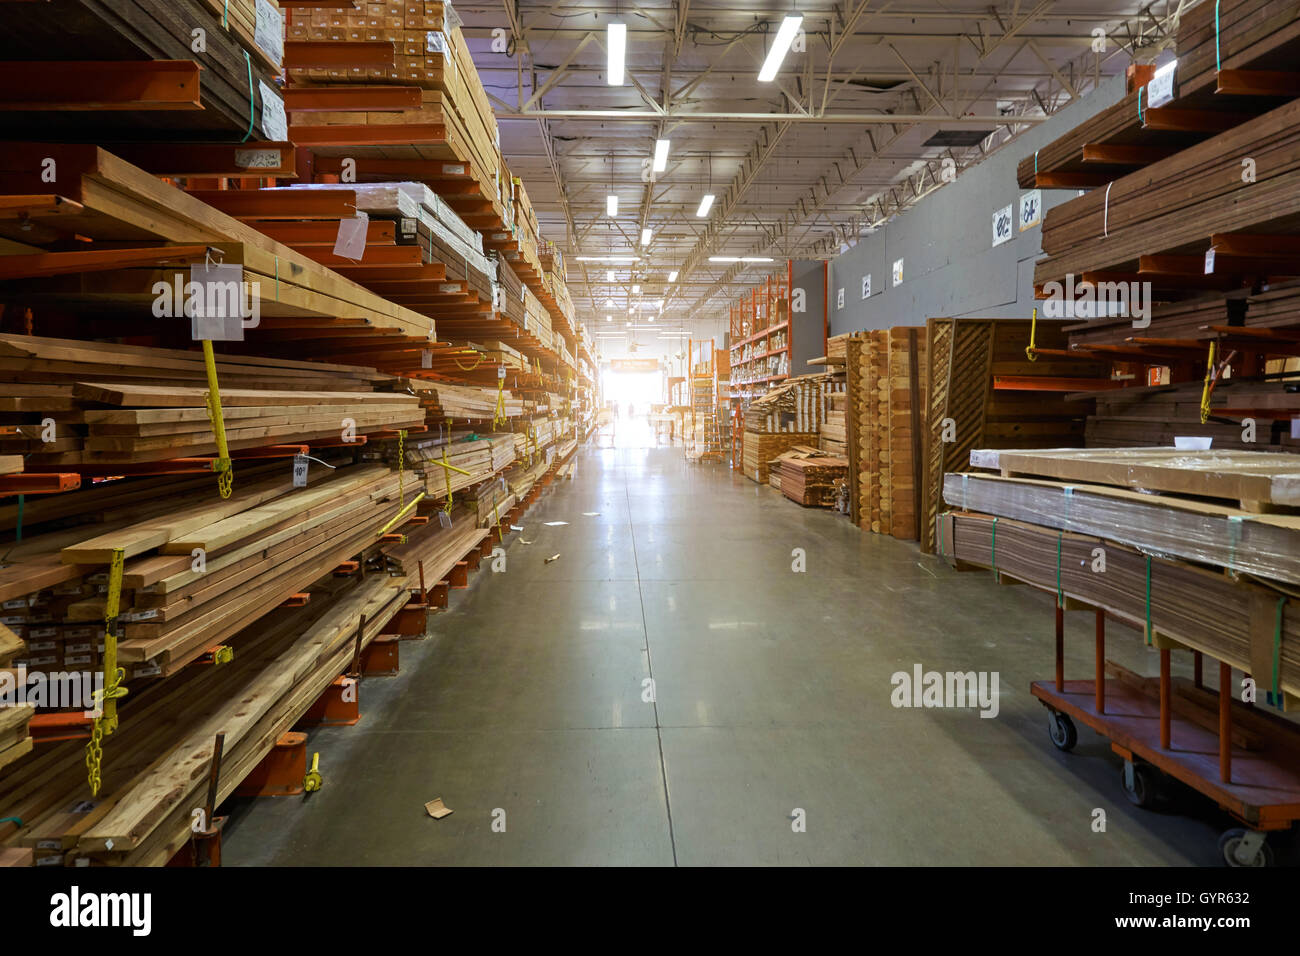 Los Angeles, CA, USA - September 13, 2016: A view of  Home Depot store Stock Photo